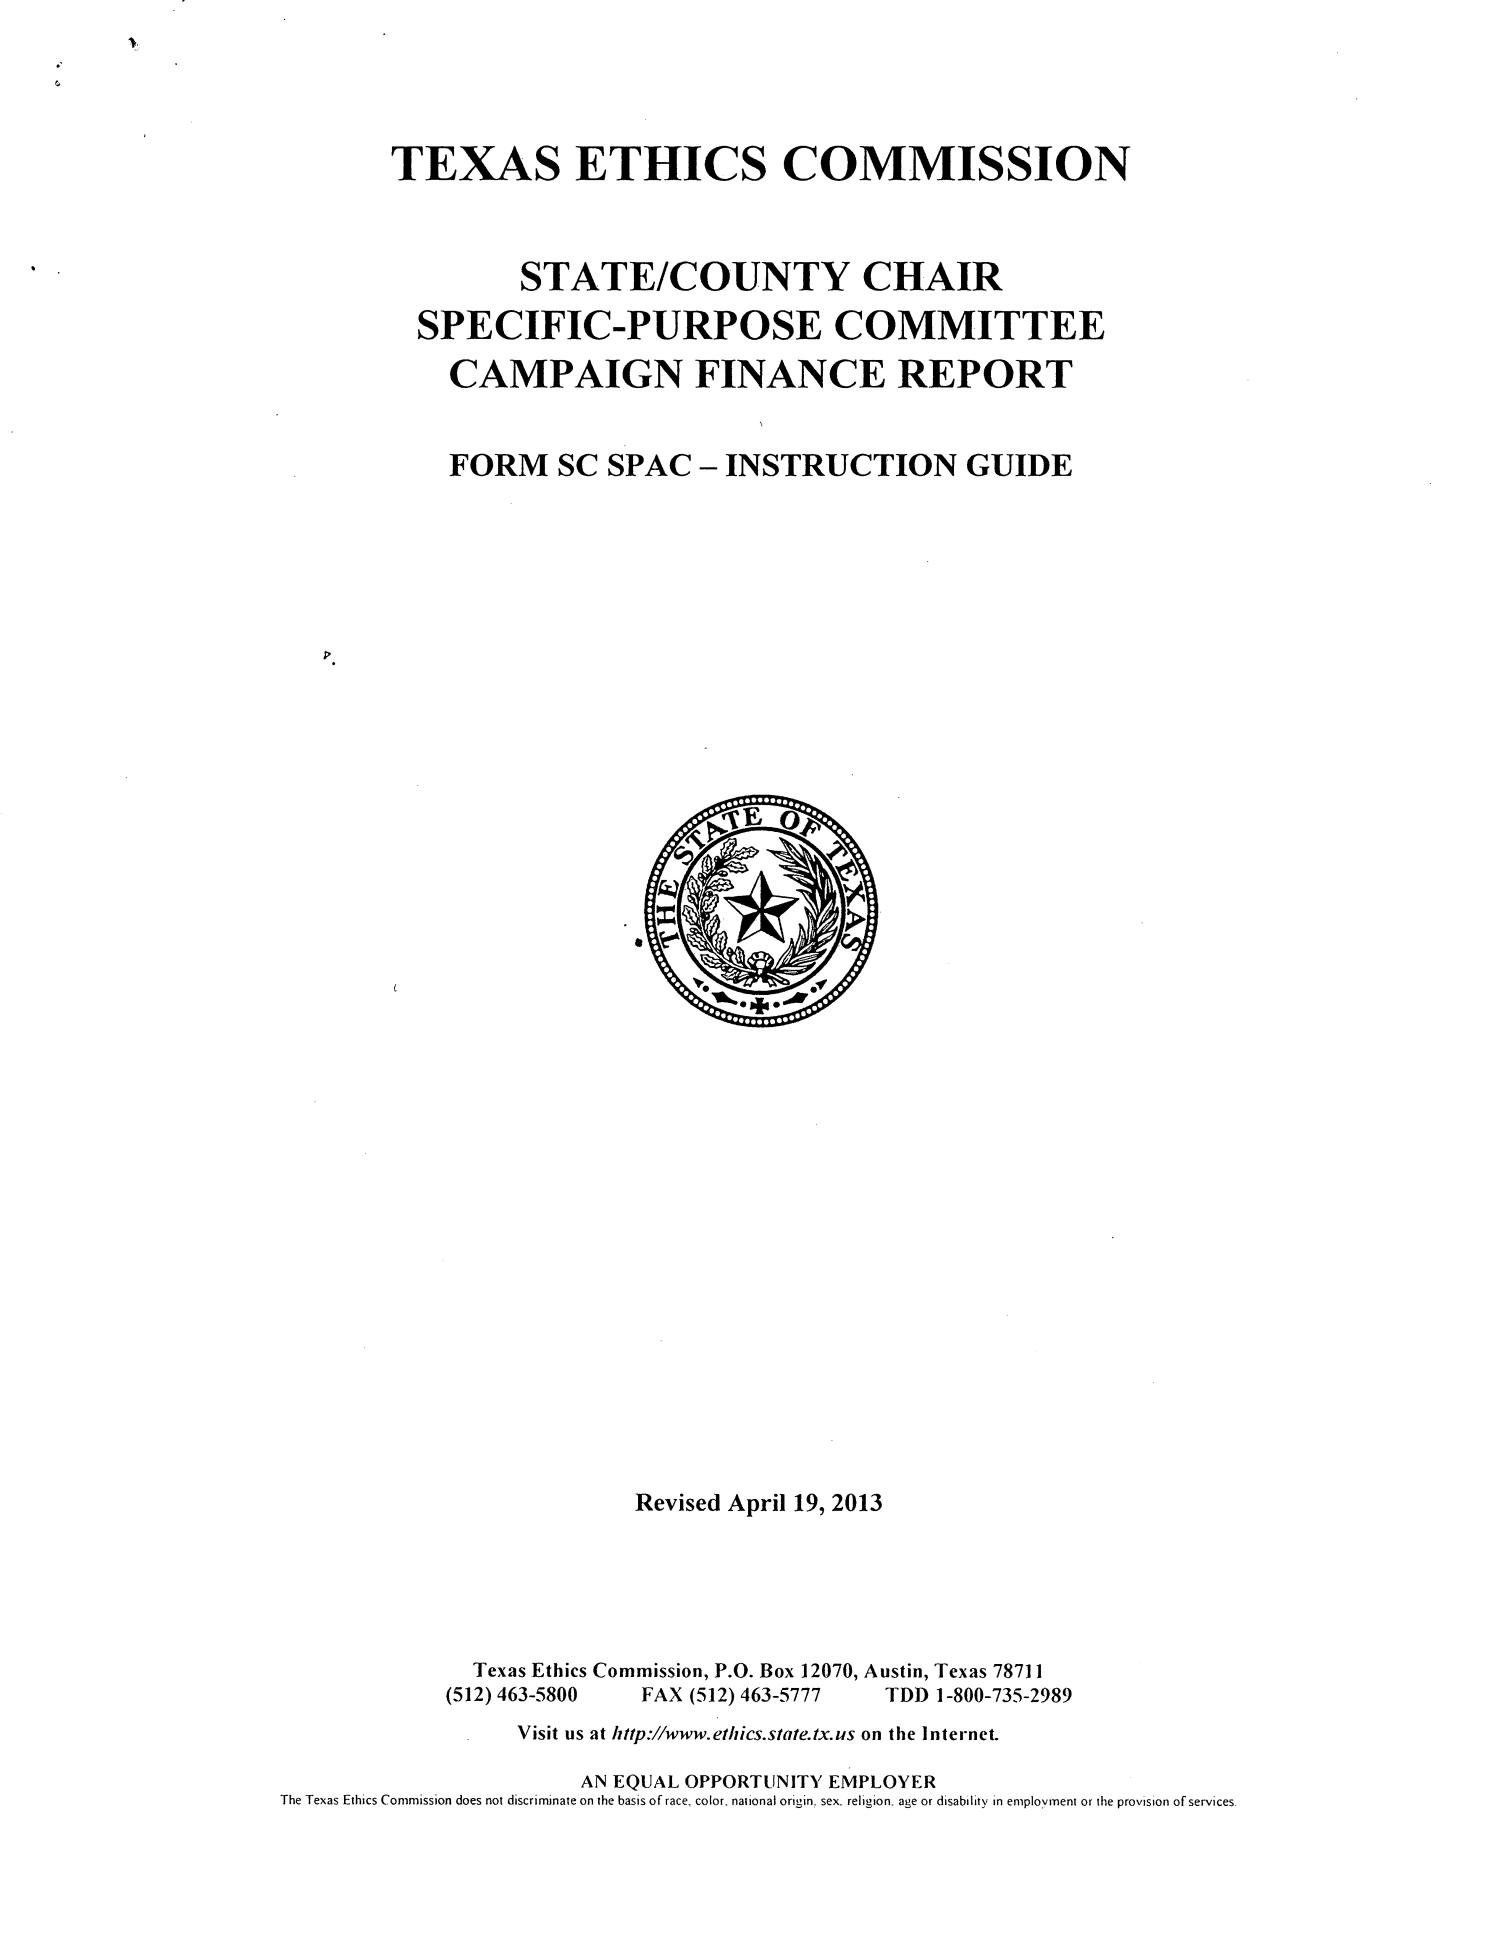 Form SC SPAC Instruction Guide: State/County Chair Specific-Purpose Committee Campaign Finance Report
                                                
                                                    Front Cover
                                                